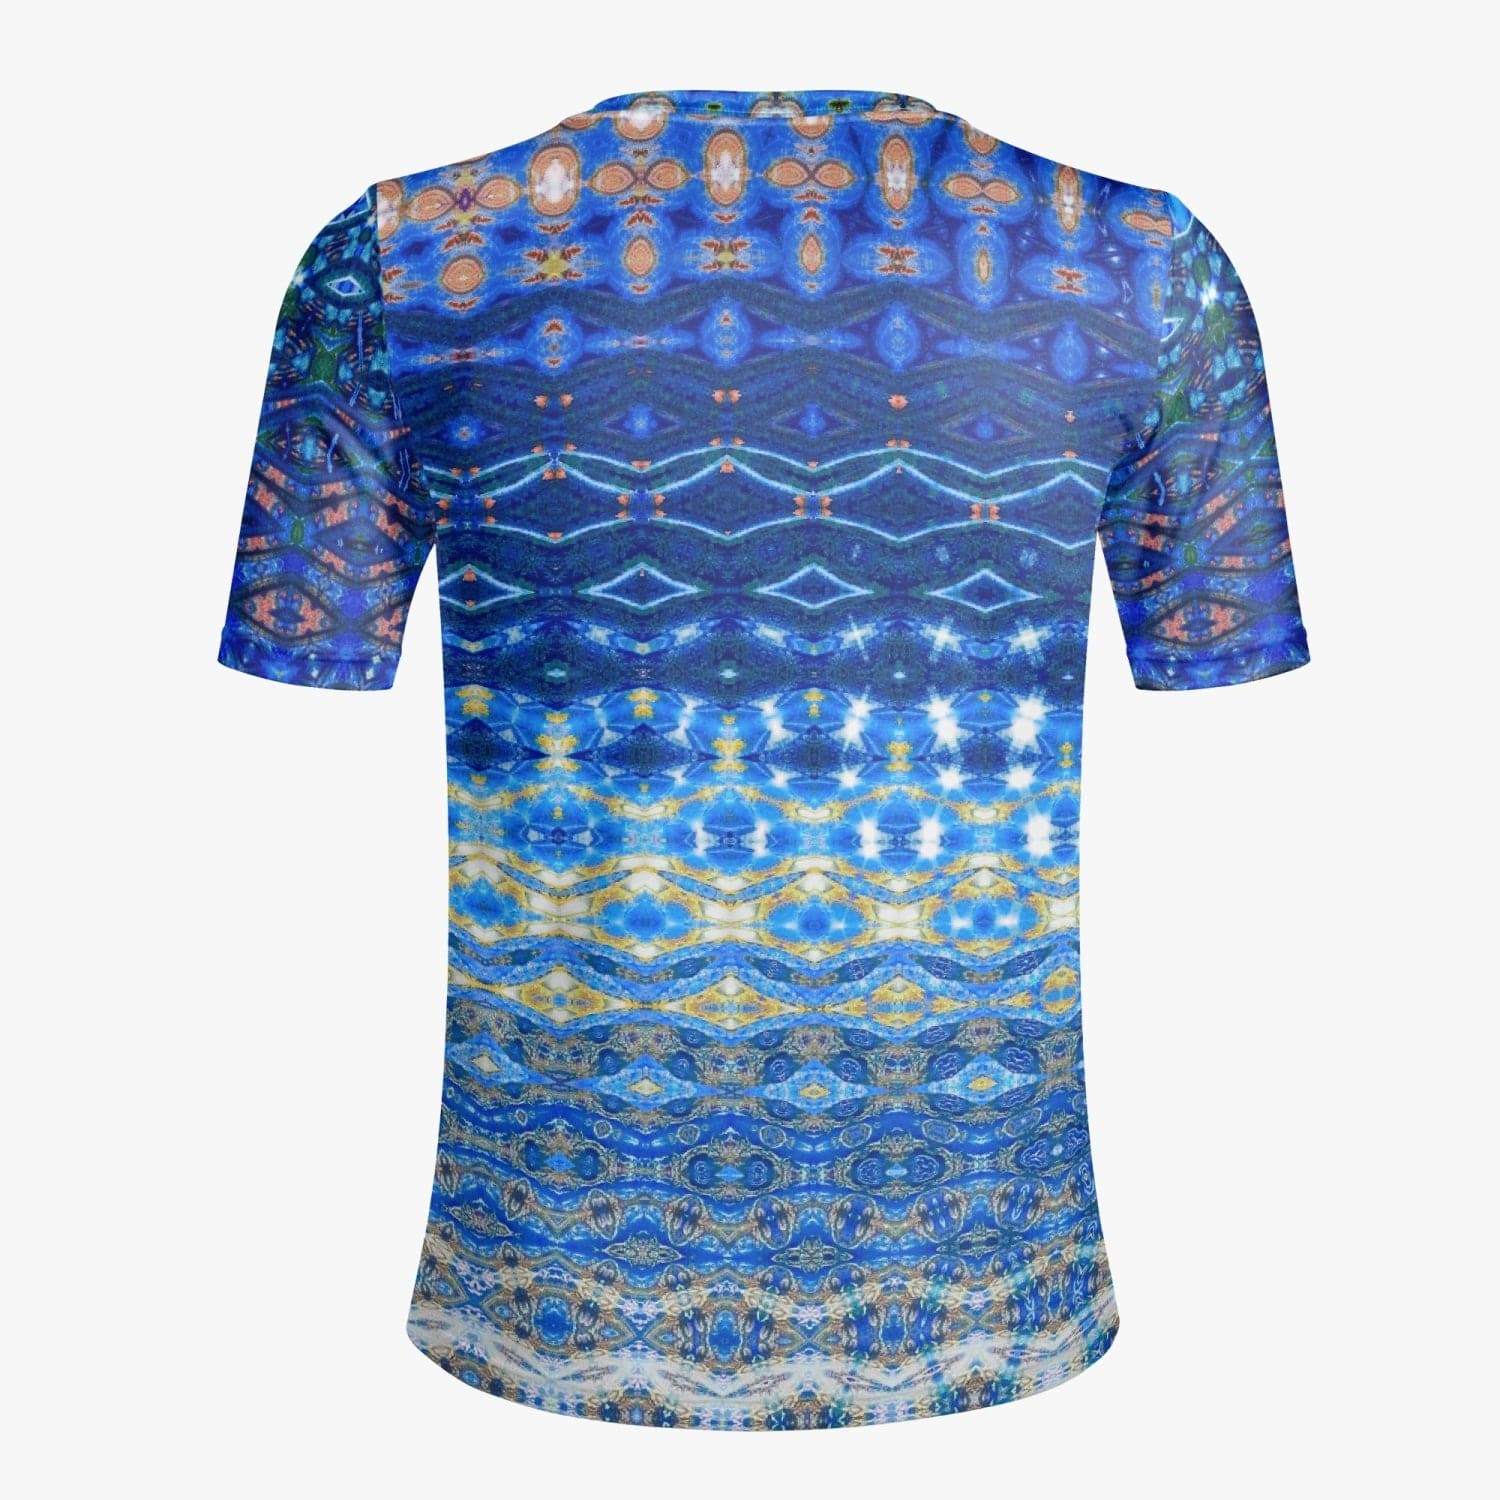 Blue and Purple Patterned. Handmade T-shirt for Men